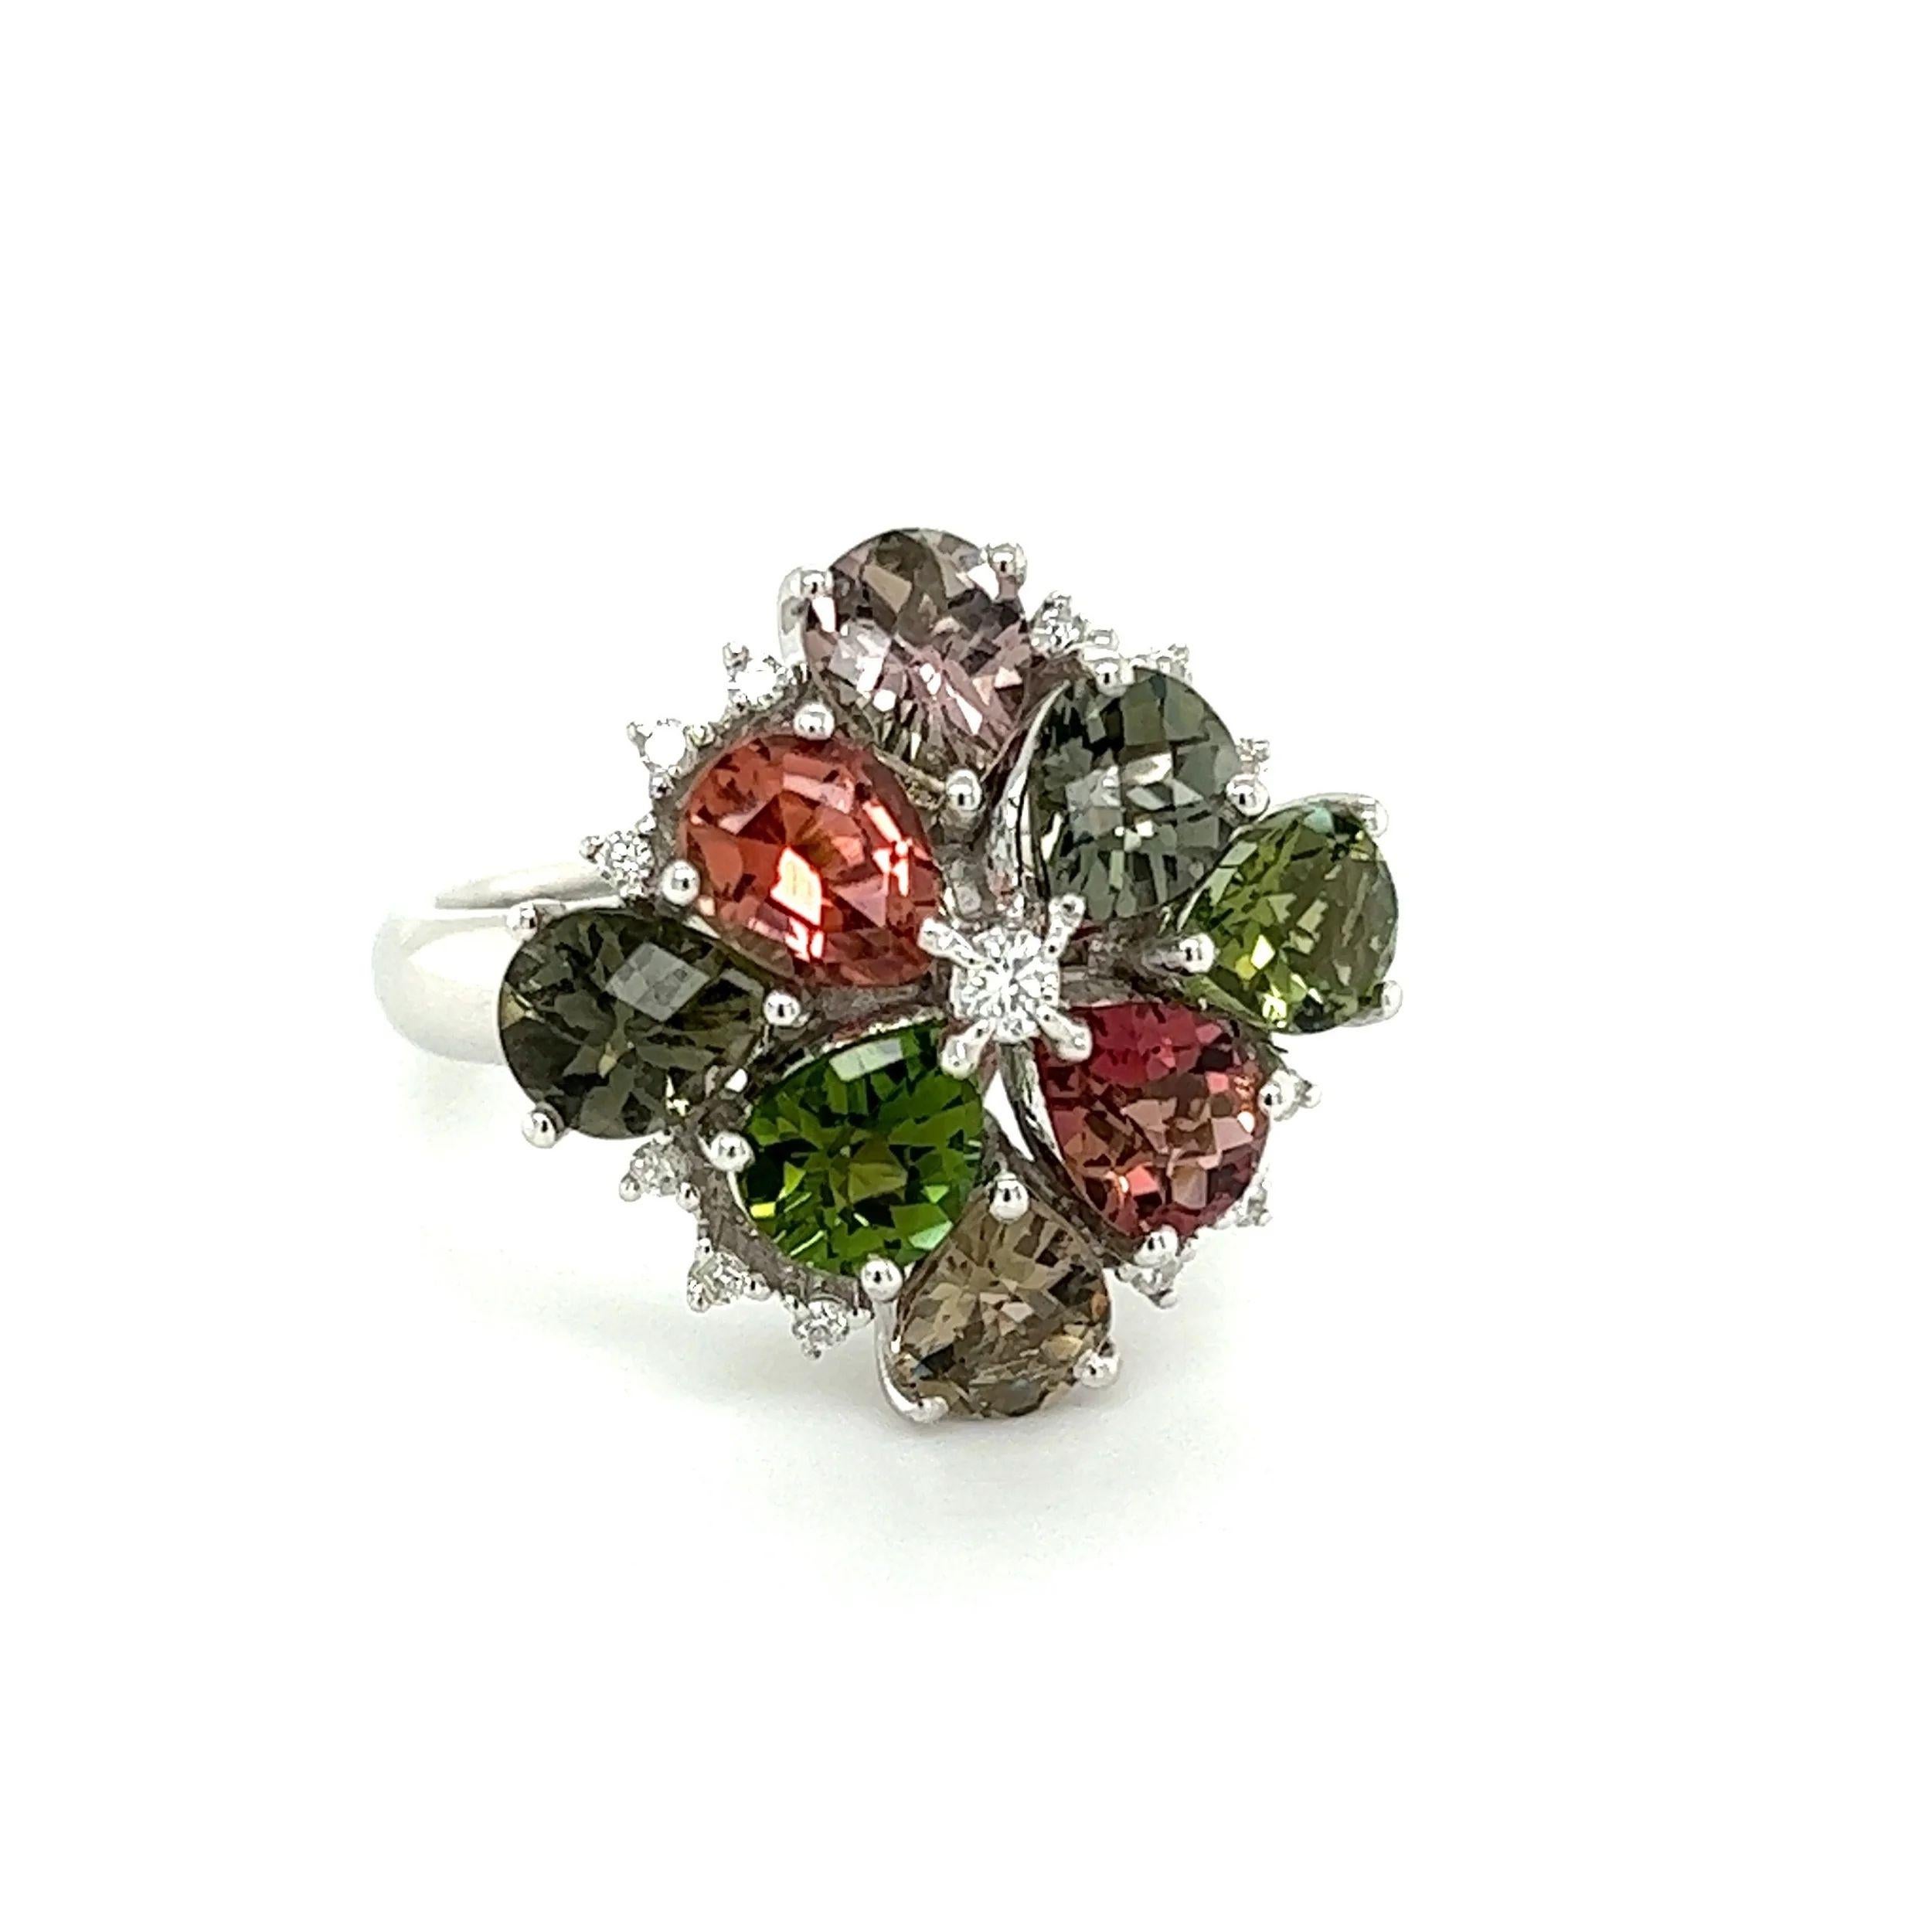 Simply Beautiful! Rainbow Tourmaline and Diamond Vintage Gold Cluster Ring. Securely Hand set with Tourmaline Gemstones, weighing approx. 4.55tcw and Diamonds, approx. 0.16tcw. The ring is Hand crafted in 18K White Gold. Measuring approx. 1.16” L x